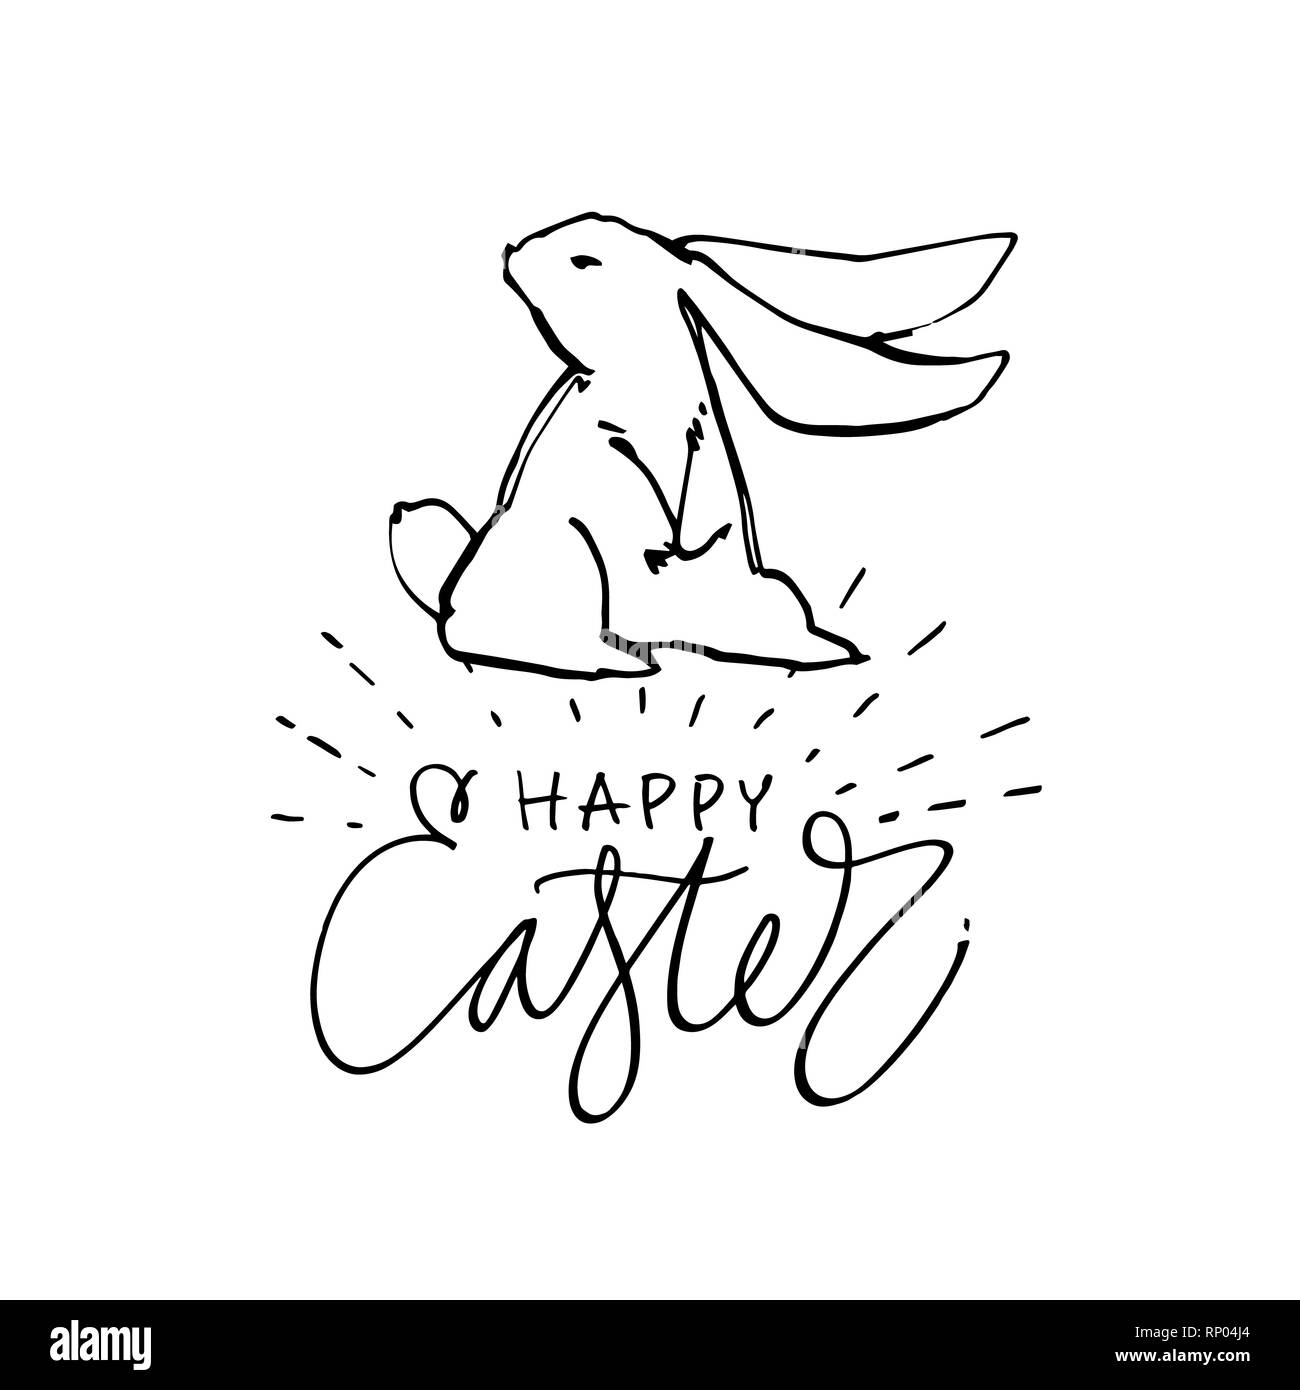 Happy easter text with ornament egg drawing  Stock Illustration 48791216   PIXTA